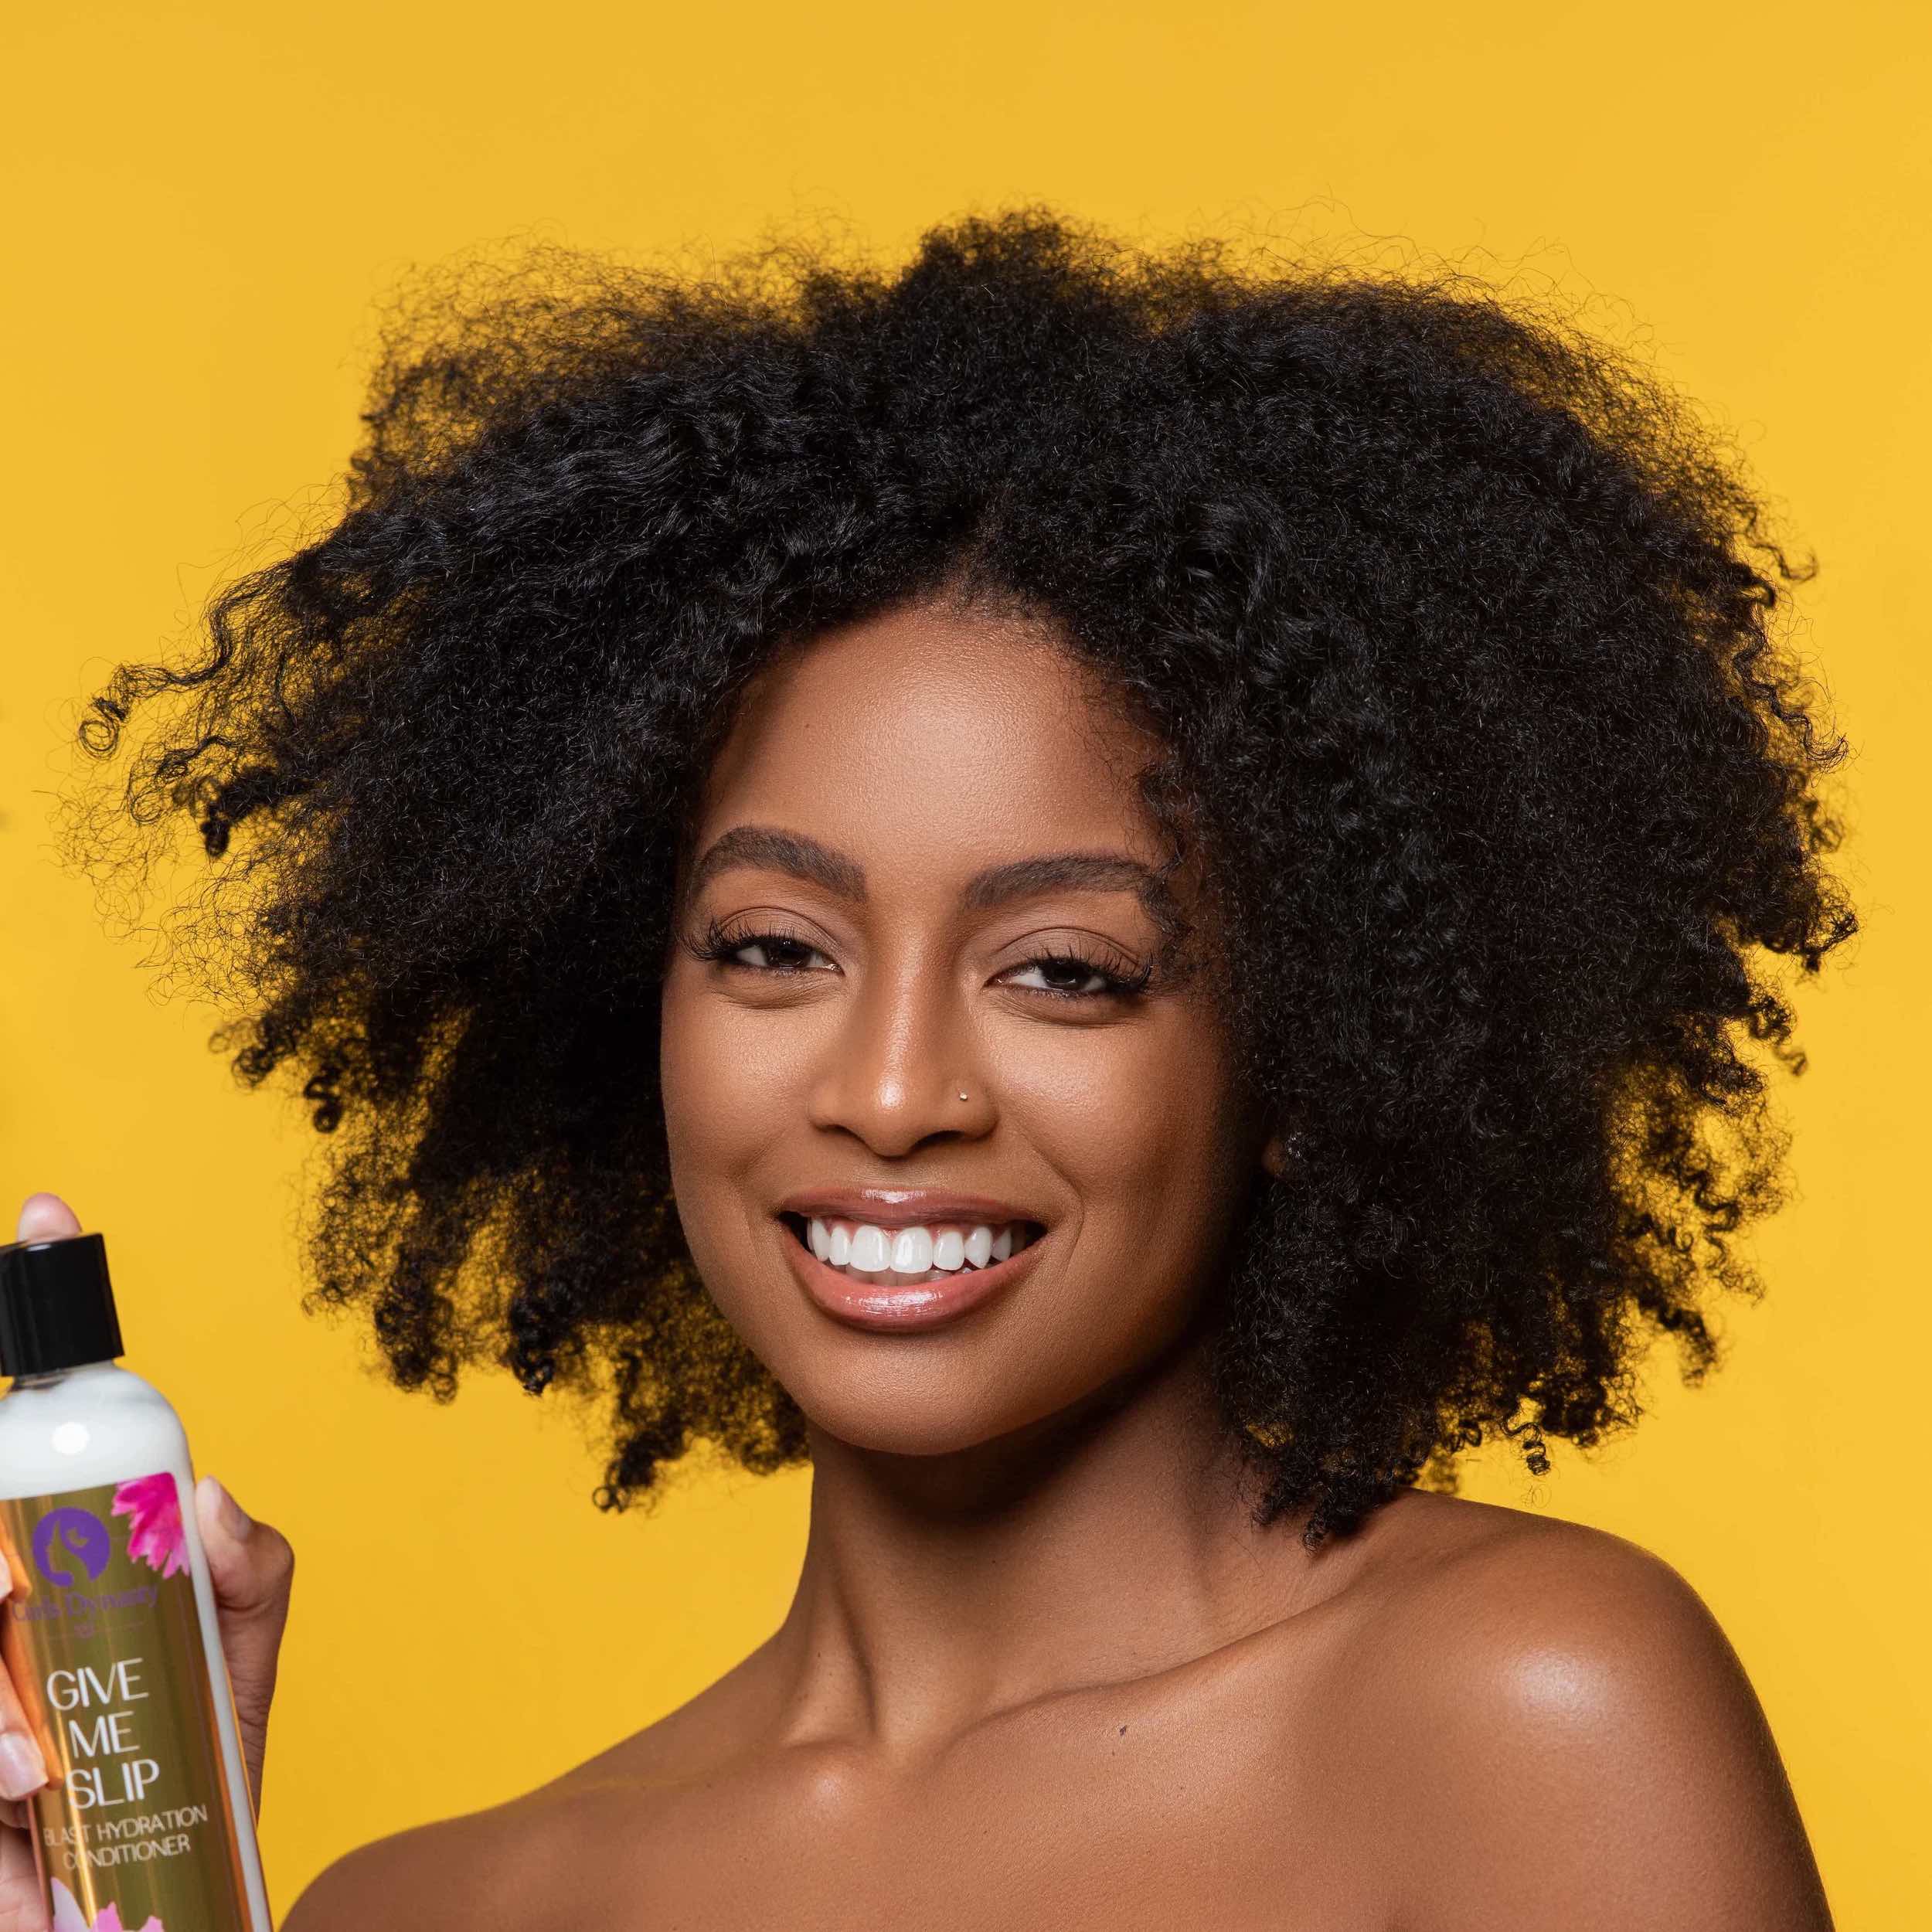 A model smiling while holding a bottle of Give Me Slip in front of an orange backdrop.